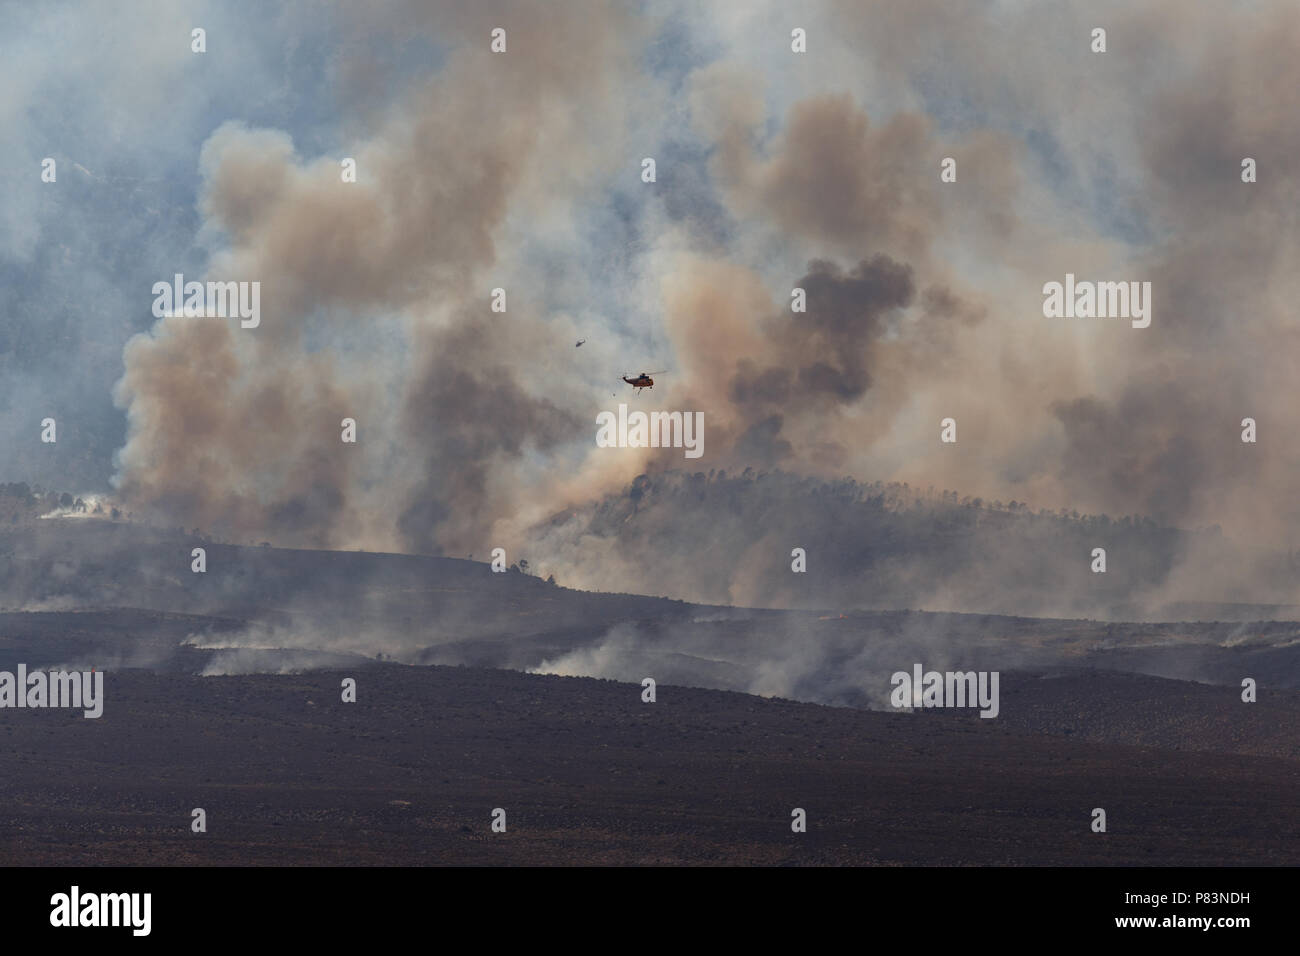 Alabama Hills, Lone Pine, CA. July 8, 2018. A  Sikorsky S-61 helicopter above the Georges Fire in the Alabama Hills west of Lone Pine, CA in eastern Sierra Nevadas.  The cause is under investigation. Lightning had been observed in the area. Fire crews from Inyo National Forest, the Bureau of Land Management (BLM),  CALFIRE, and local fire departments are fighting the fire with assistance from air tankers and helicopters. The helicopters are drawing water from the nearby California aquaduct. Credit: Ironstring/Alamy Live News Stock Photo